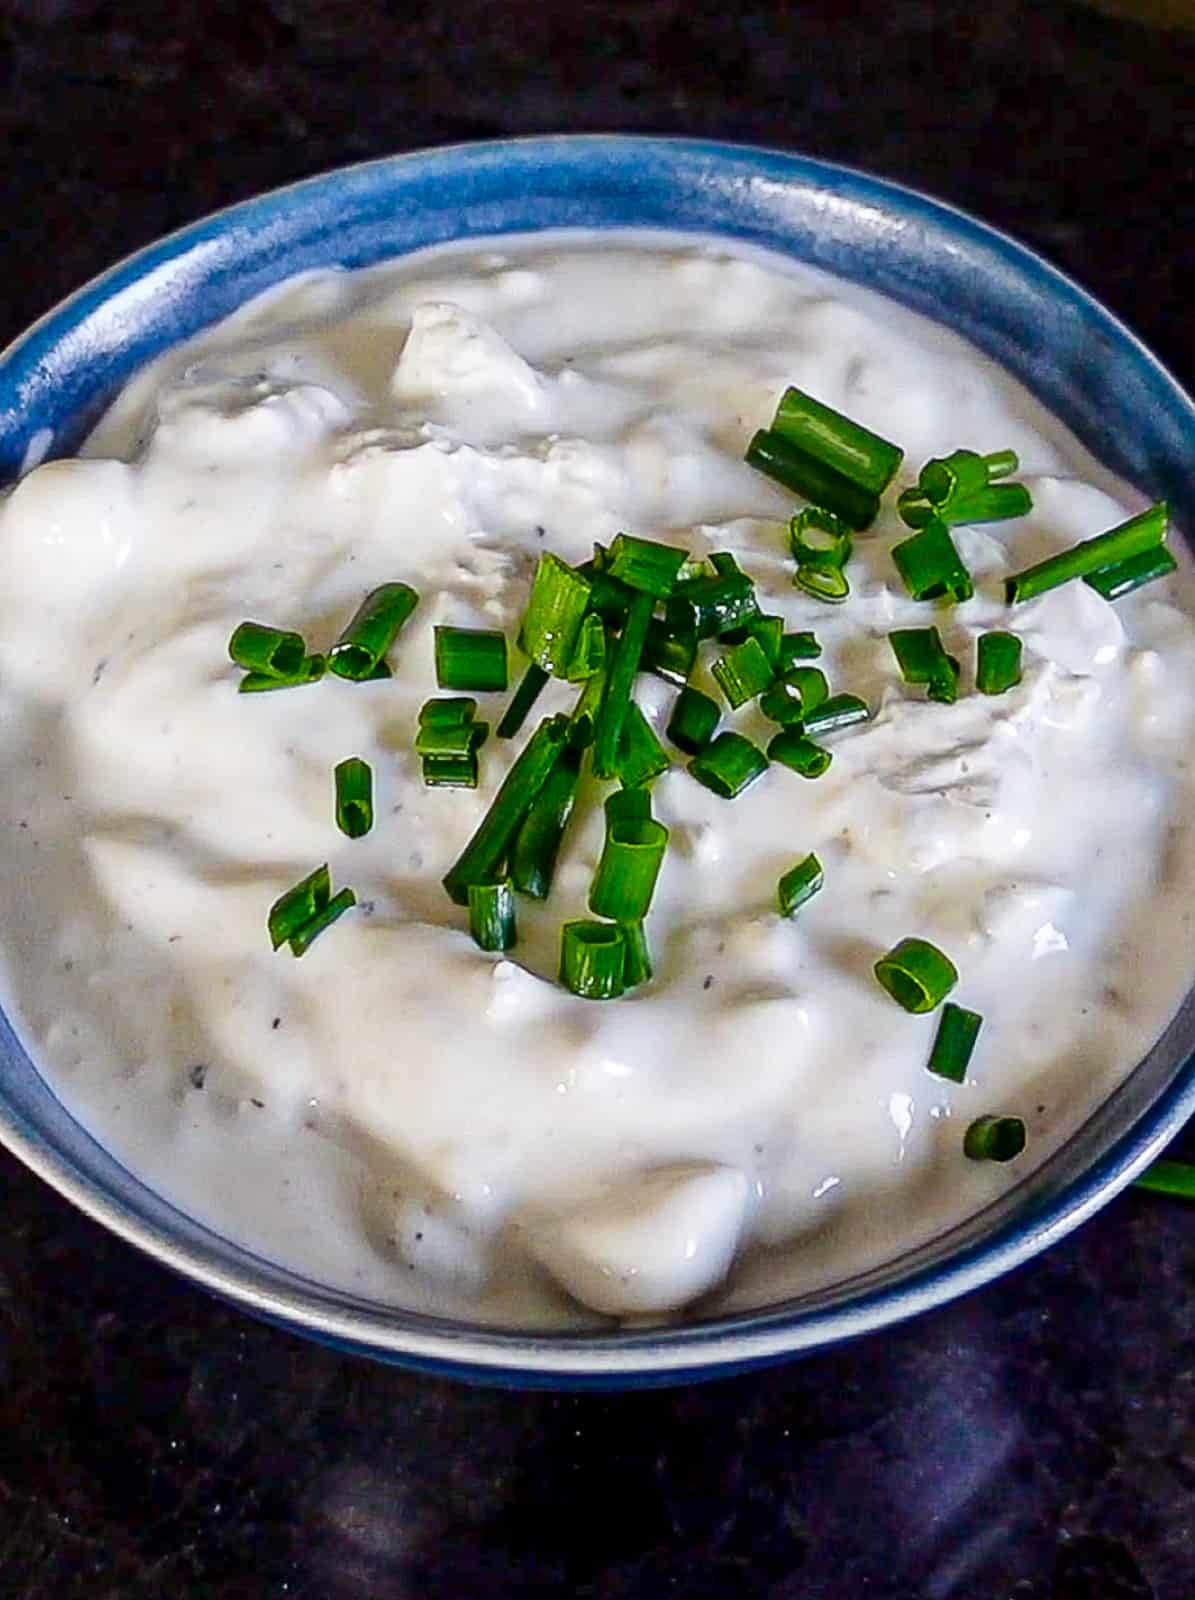 Homemade Recipe for Blue Cheese Dressing with Chives on top in a Dip Bowl